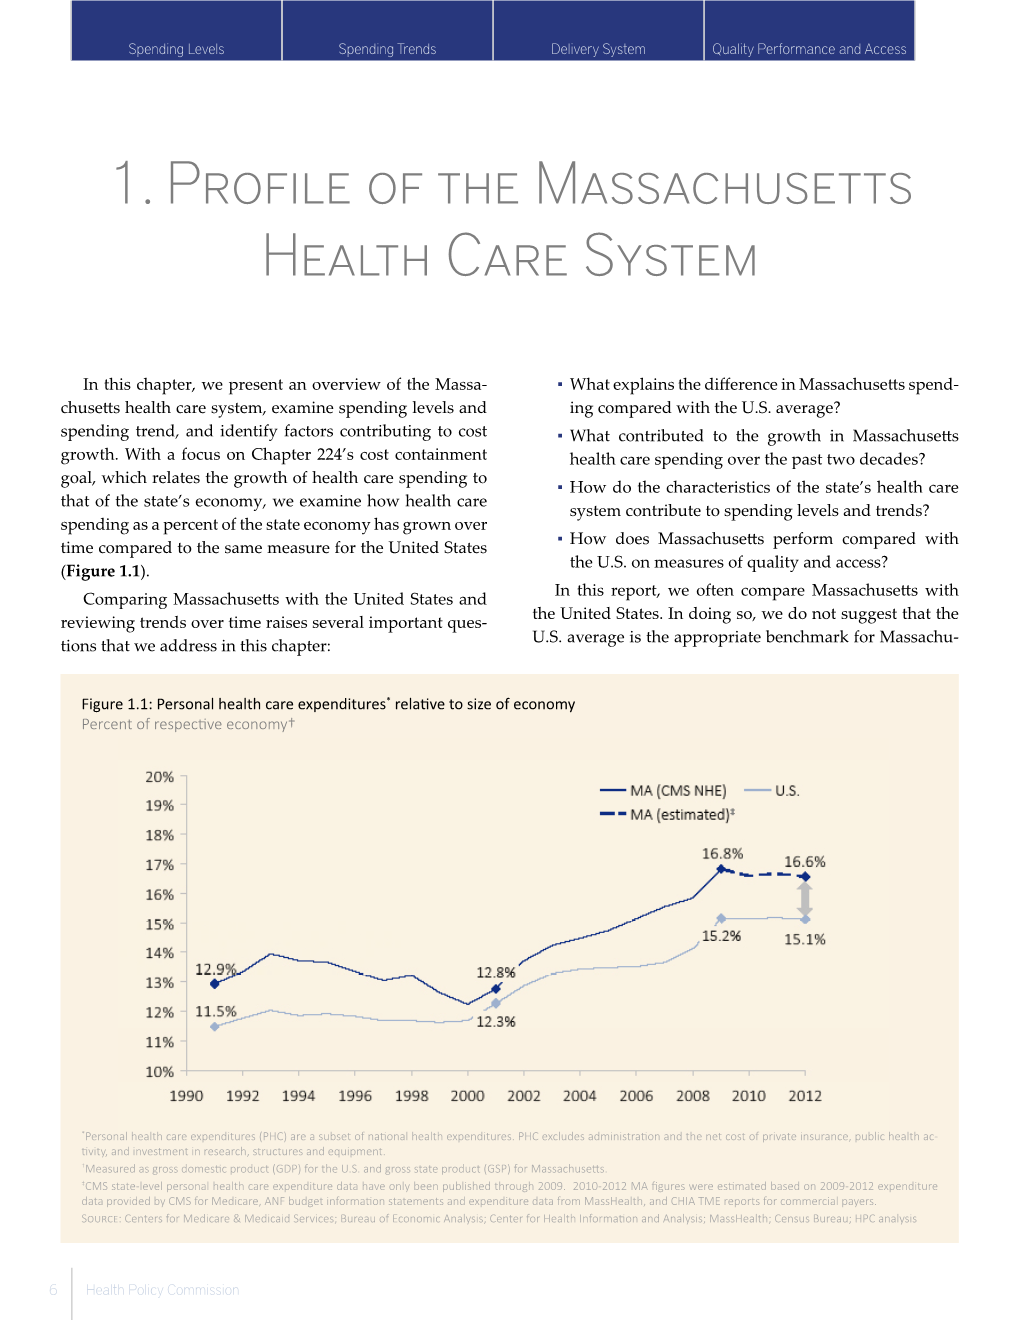 1. Profile of the Massachusetts Health Care System